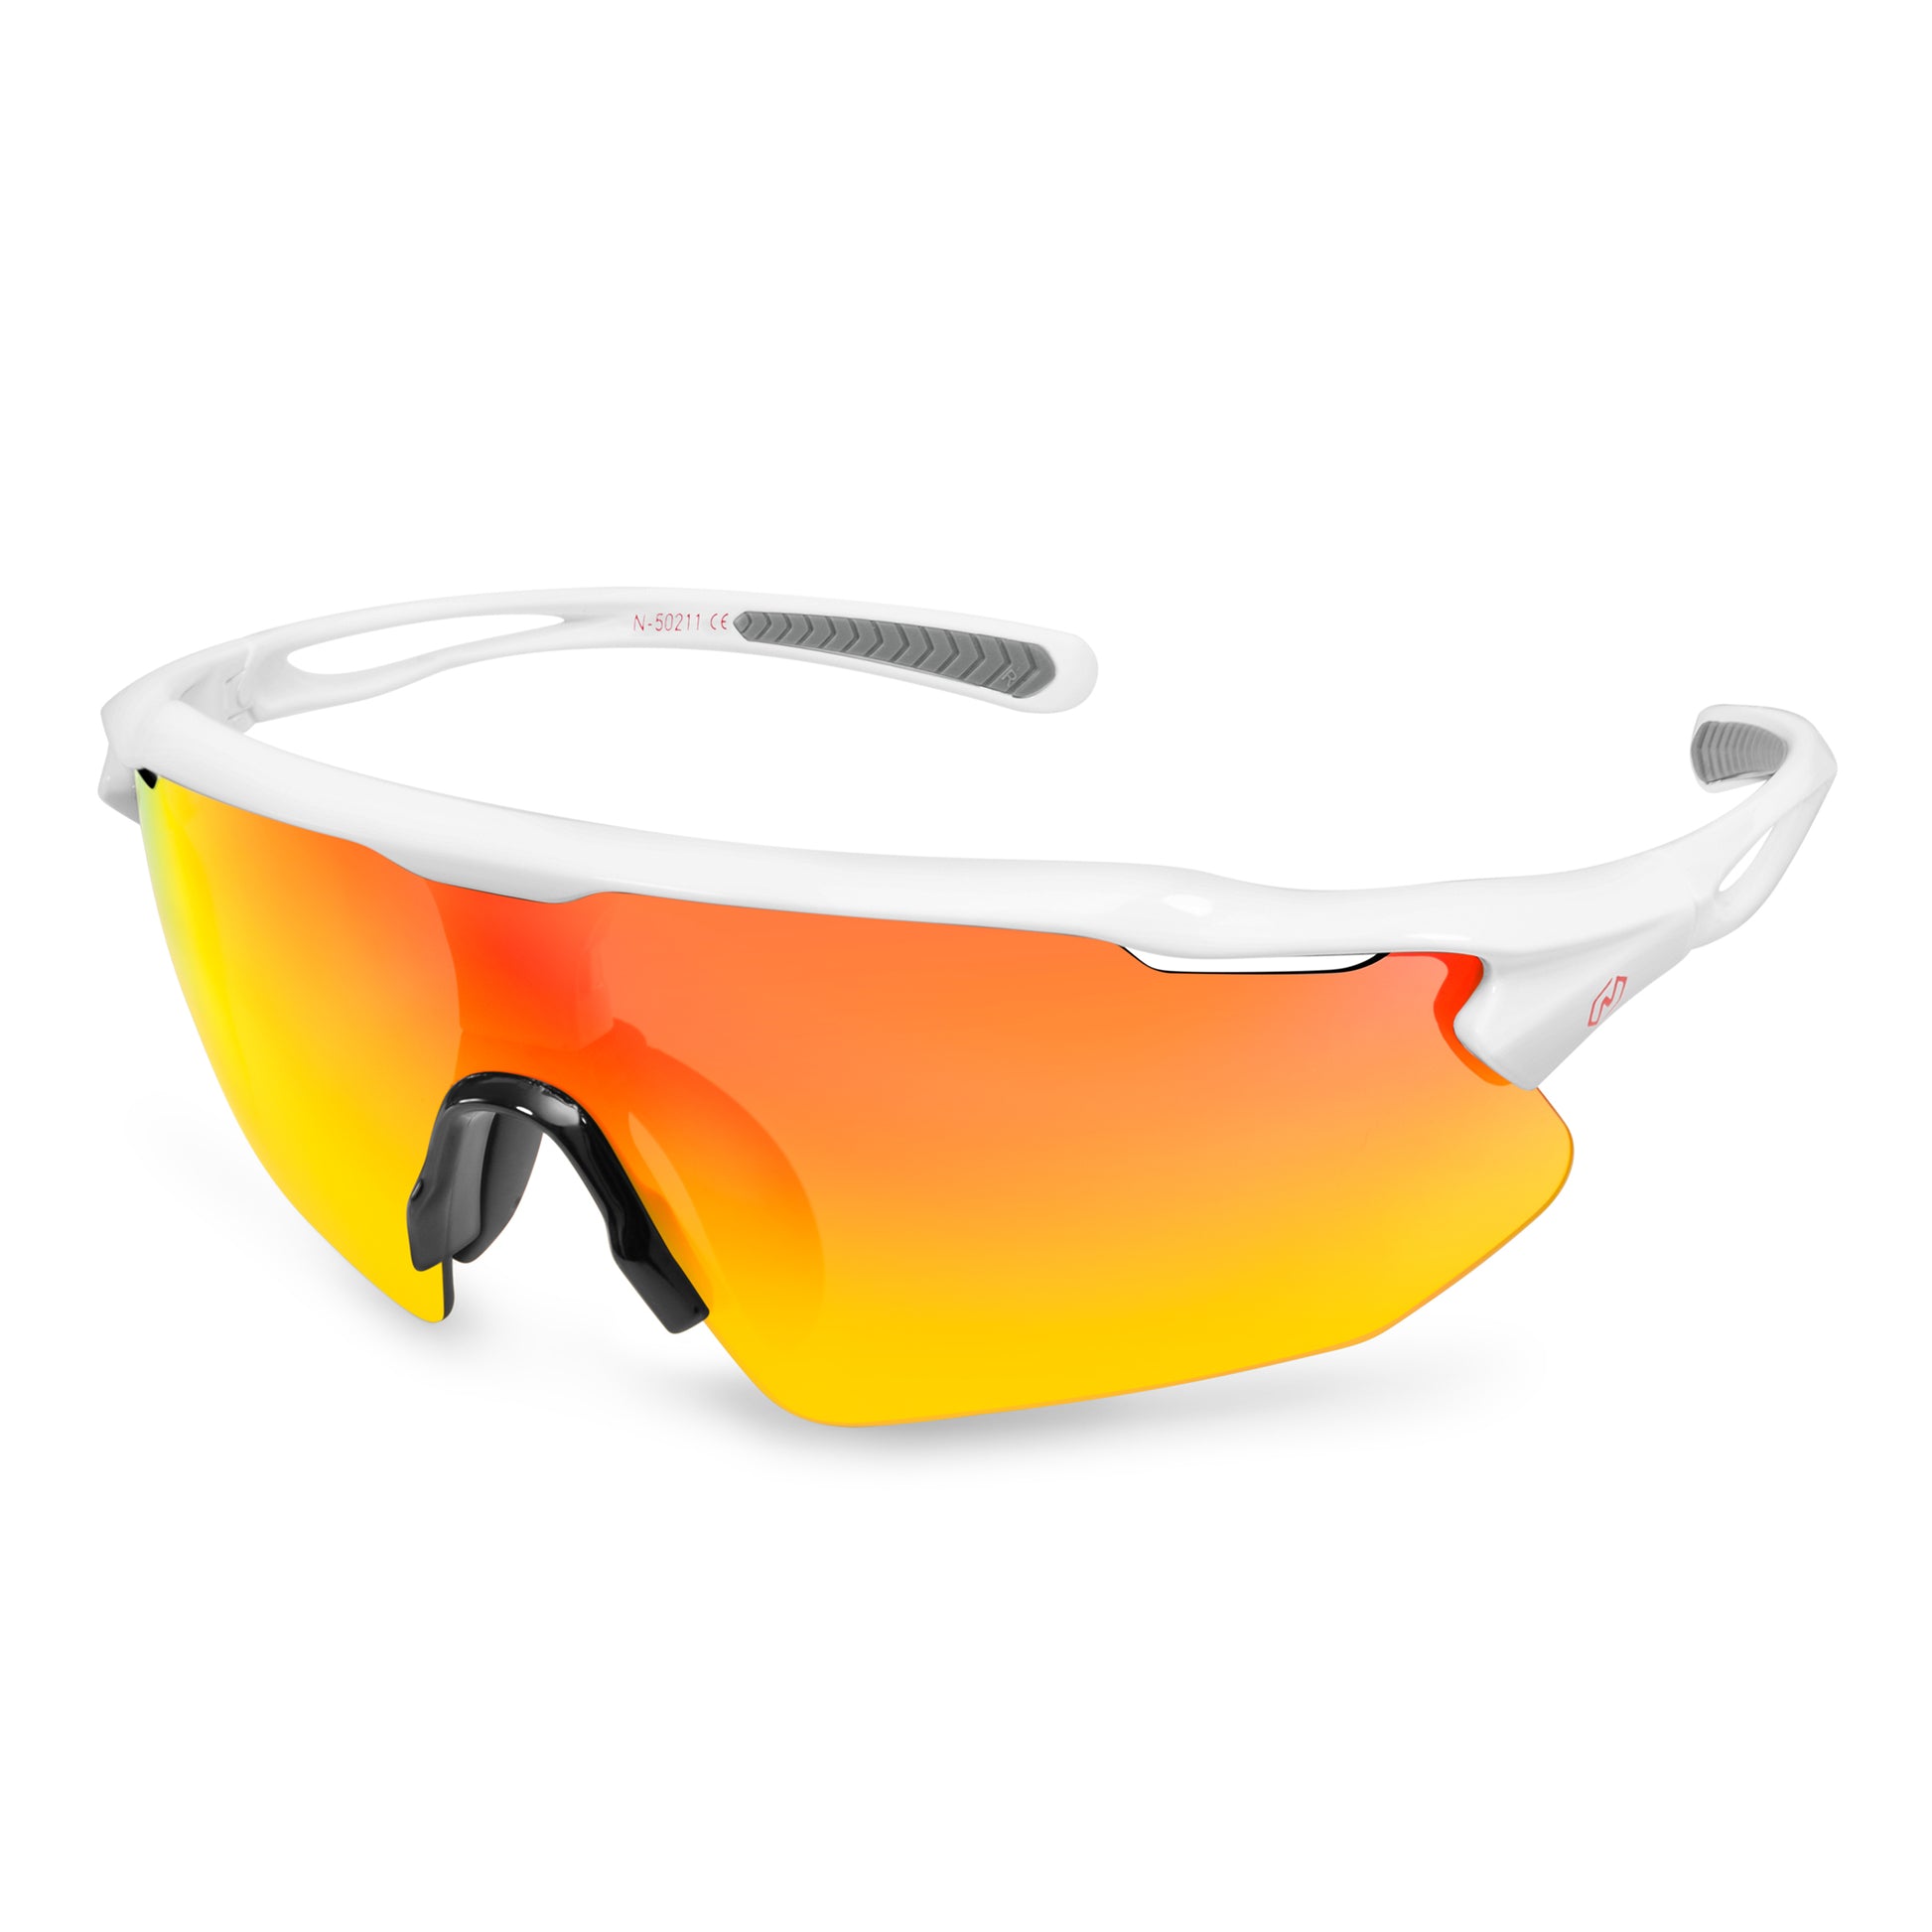 Aksel Diamant™ Cycling/Running/ Sunglasses UV Protection for Women